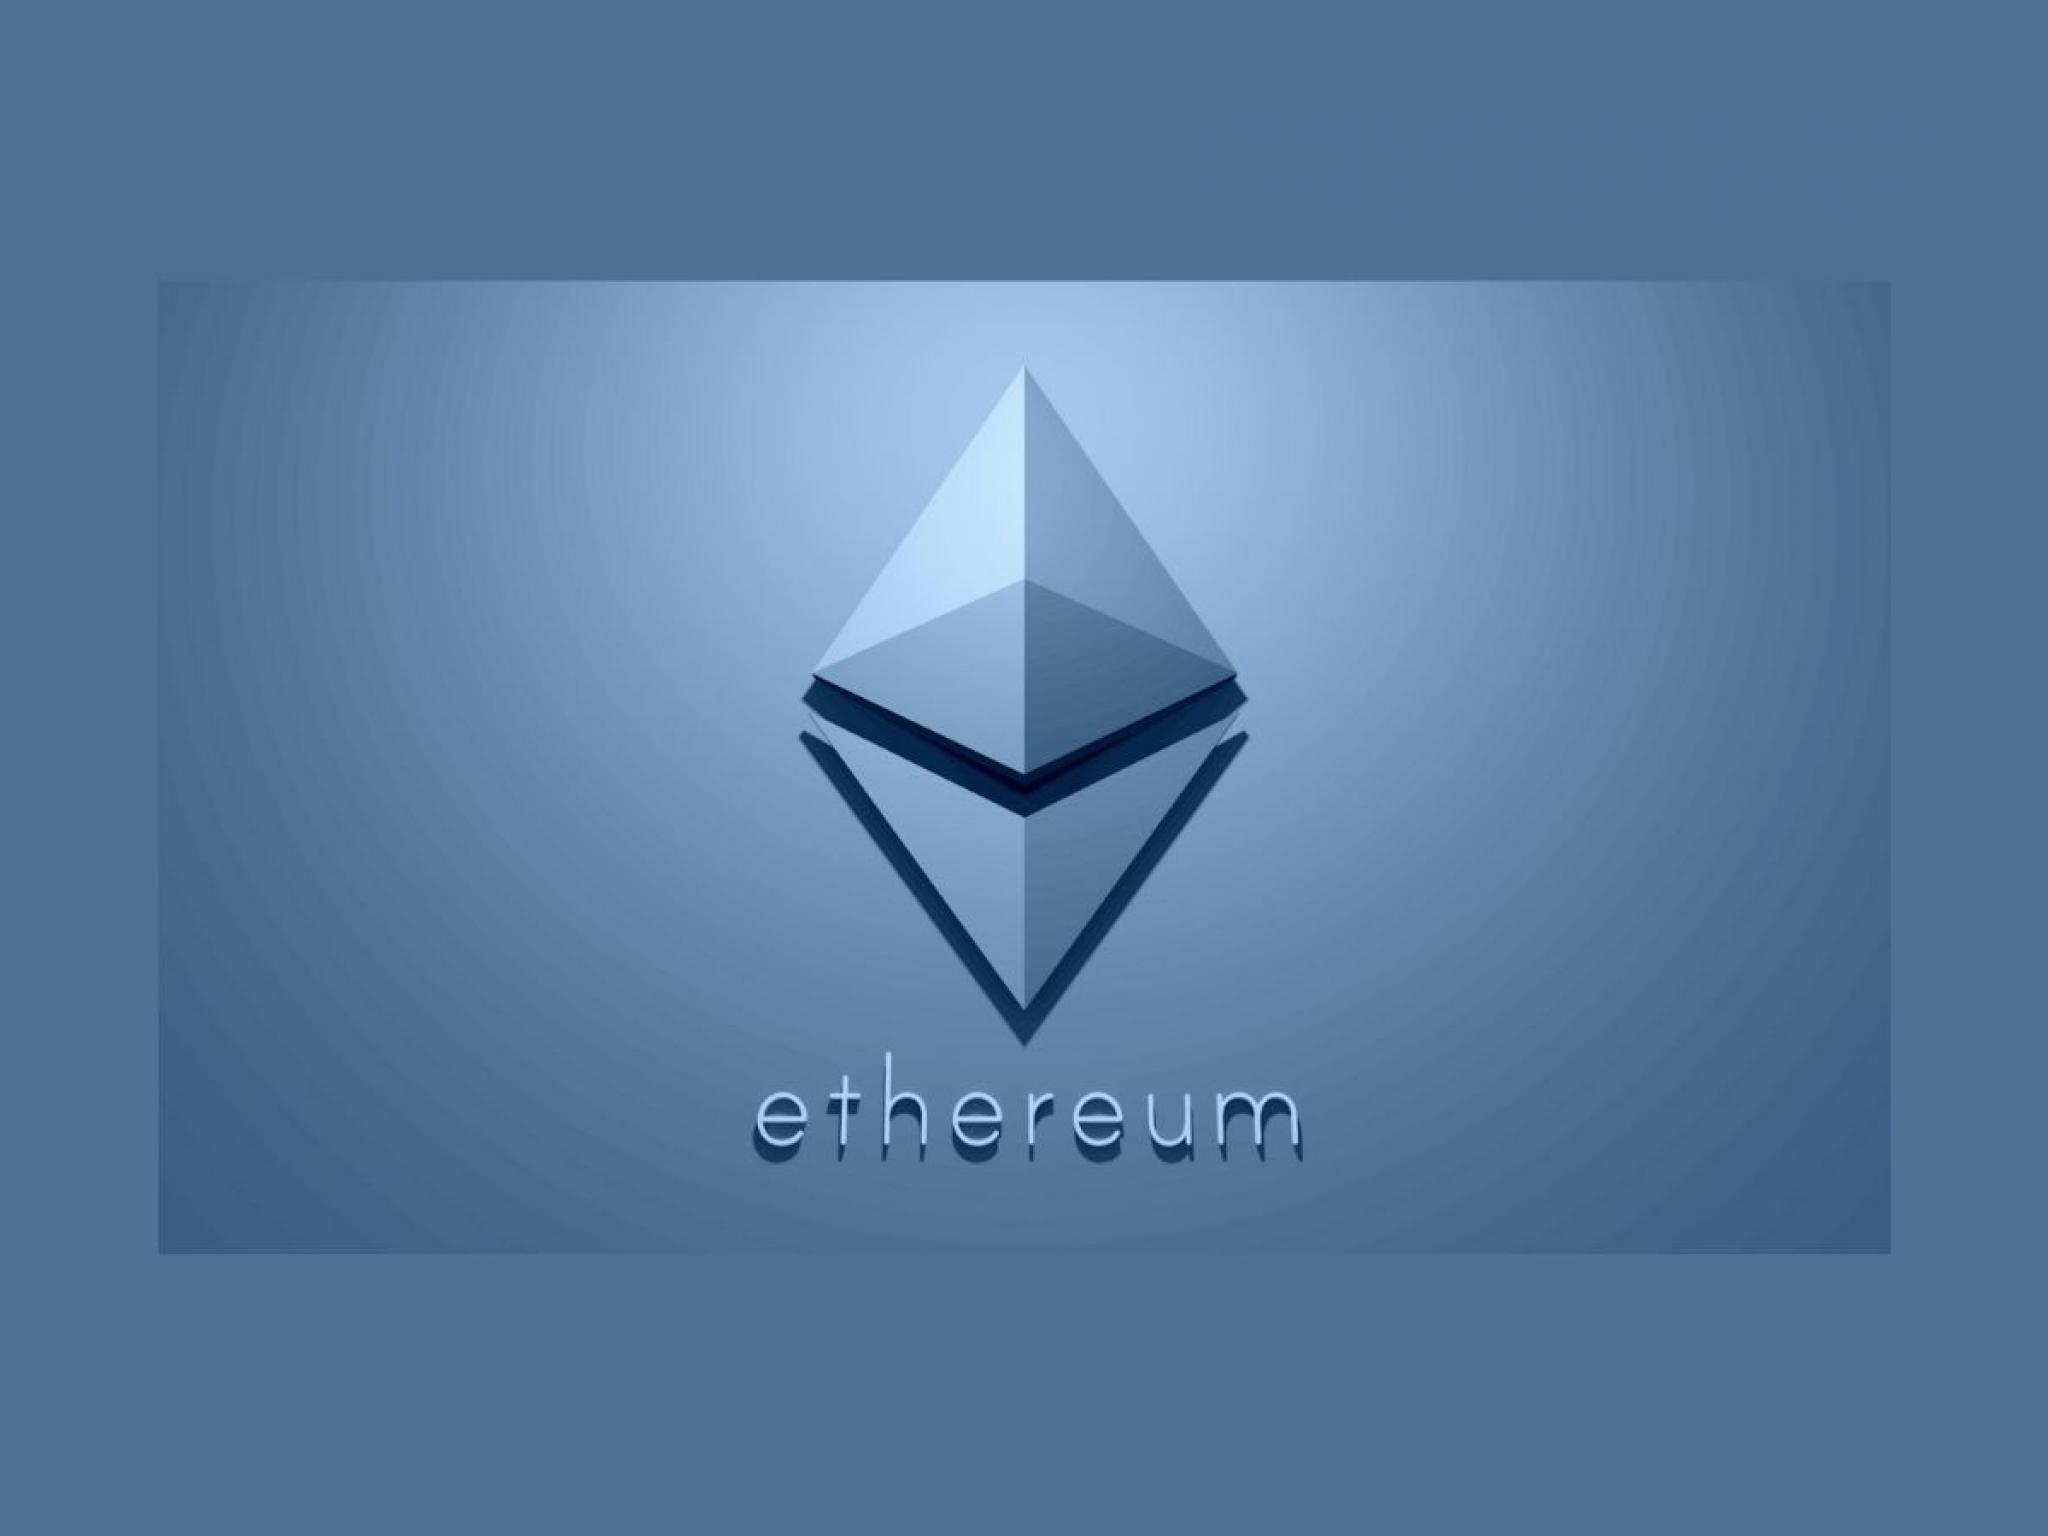  ethereum-tops-2900-starknet-filecoin-among-top-gainers 